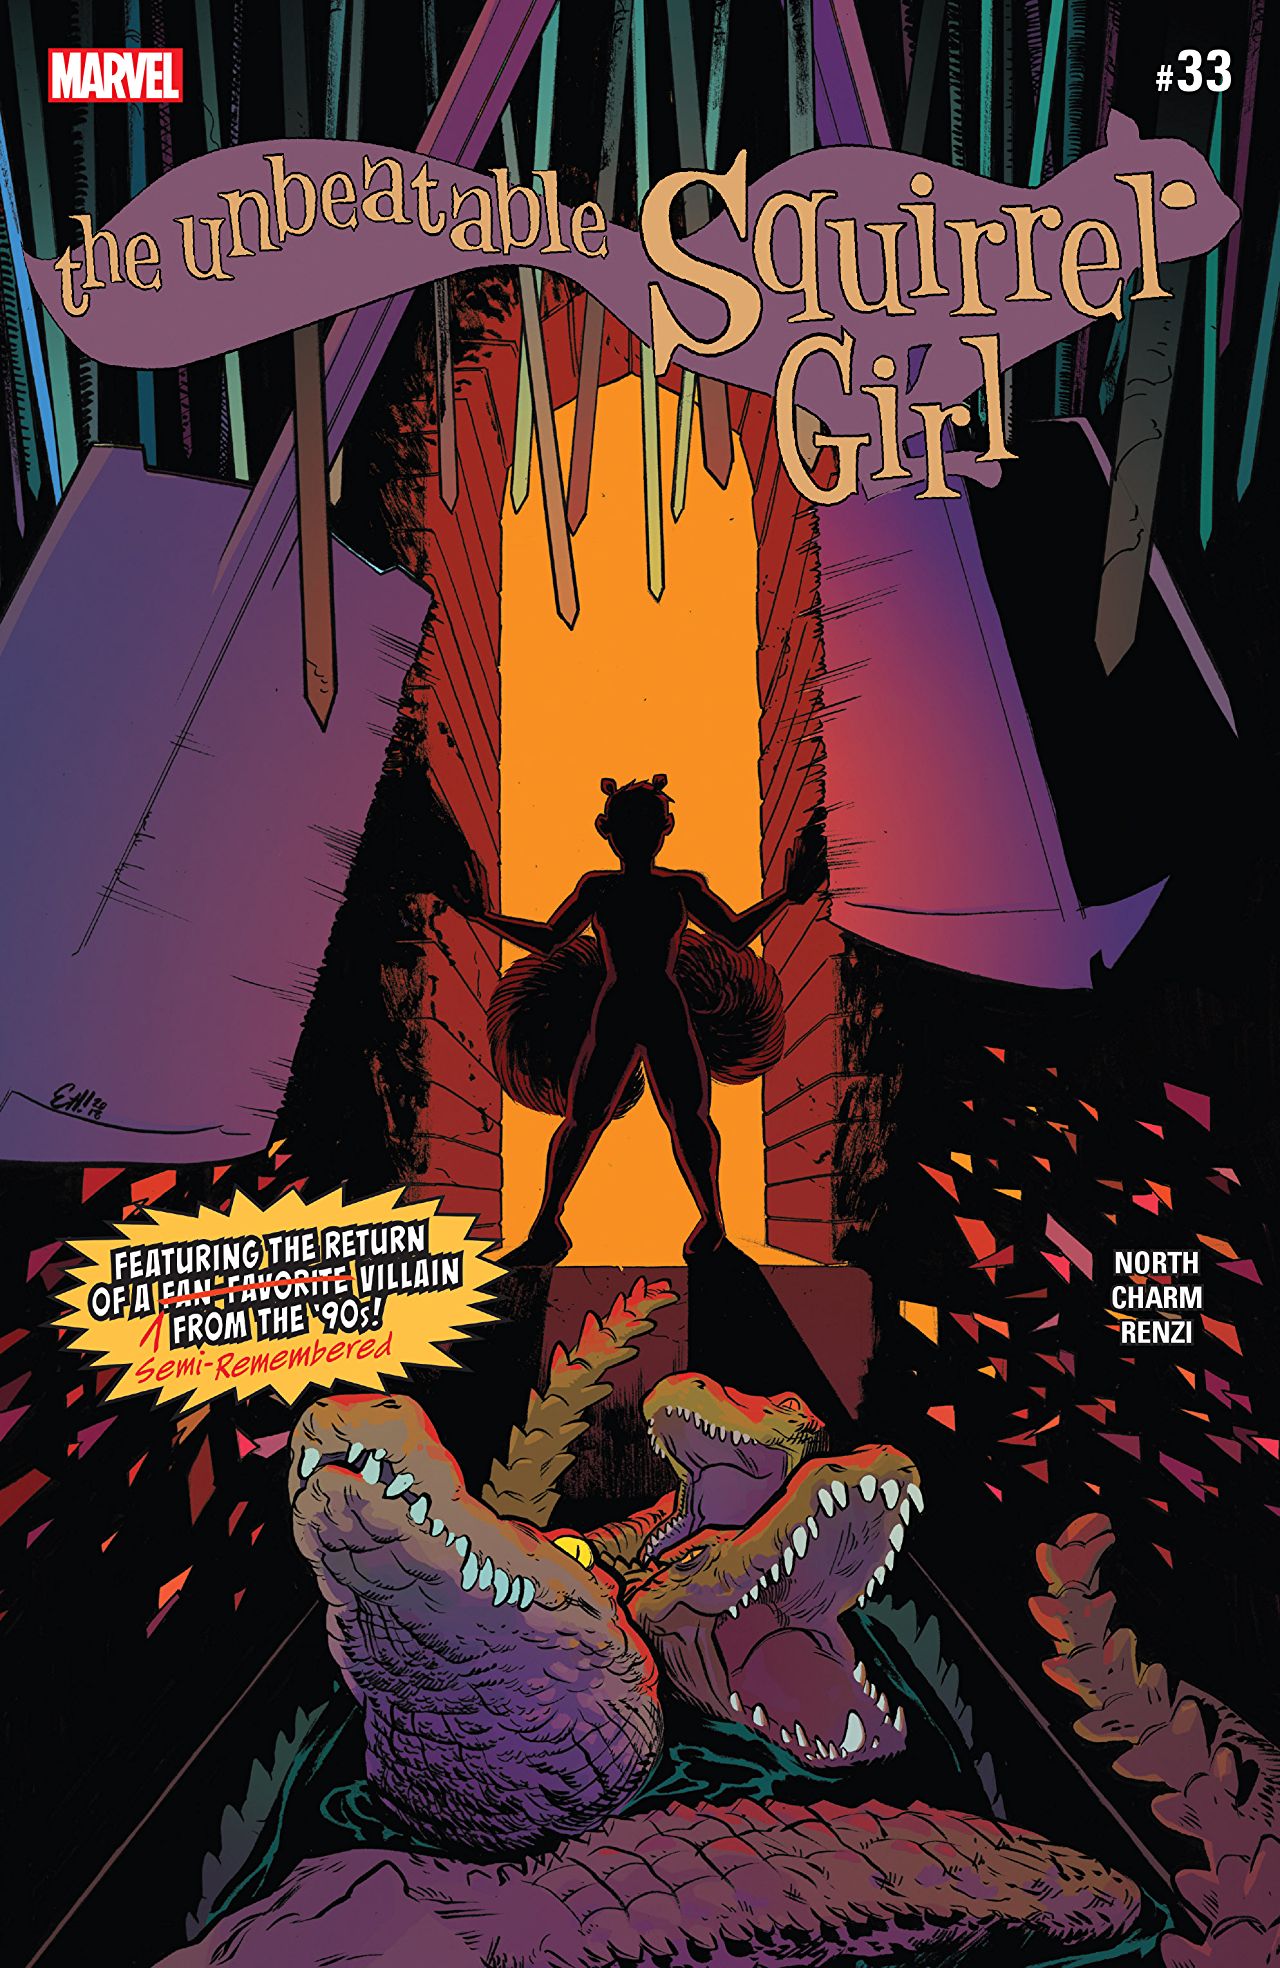 The Unbeatable Squirrel Girl #33 review: I think I'm a clone now